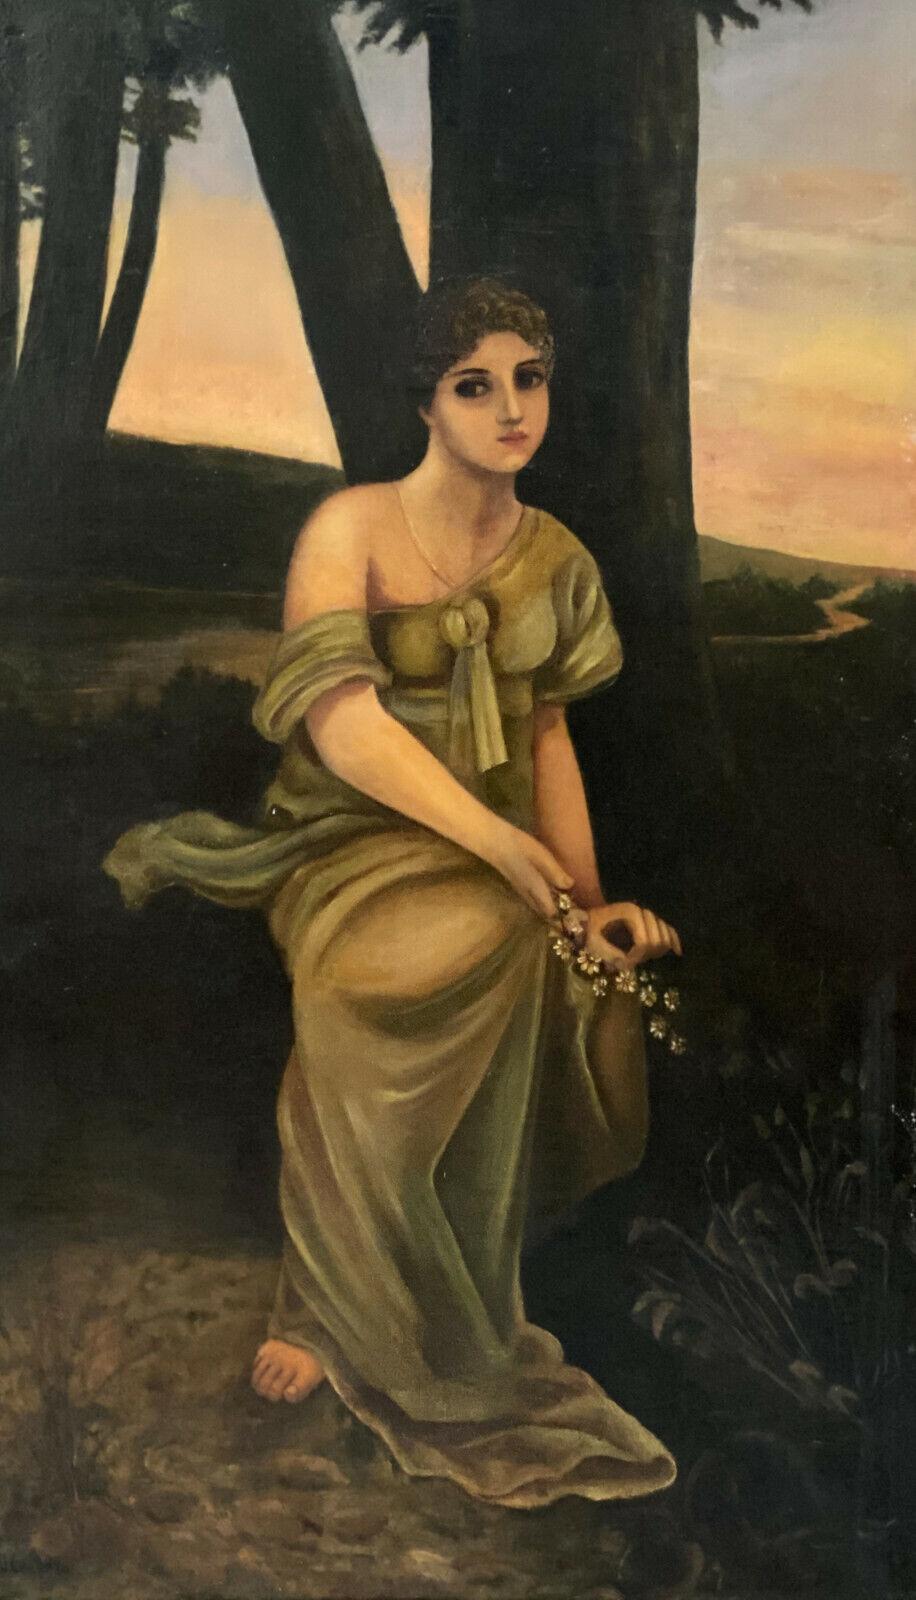 ADM Cooper oil on canvas painting of a seated beauty.

The portrait depicts a seated beauty in a green off the shoulder dress and holding white flowers in a forest. Artist signed to the lower left. Carved gilt wood frame.

Additional